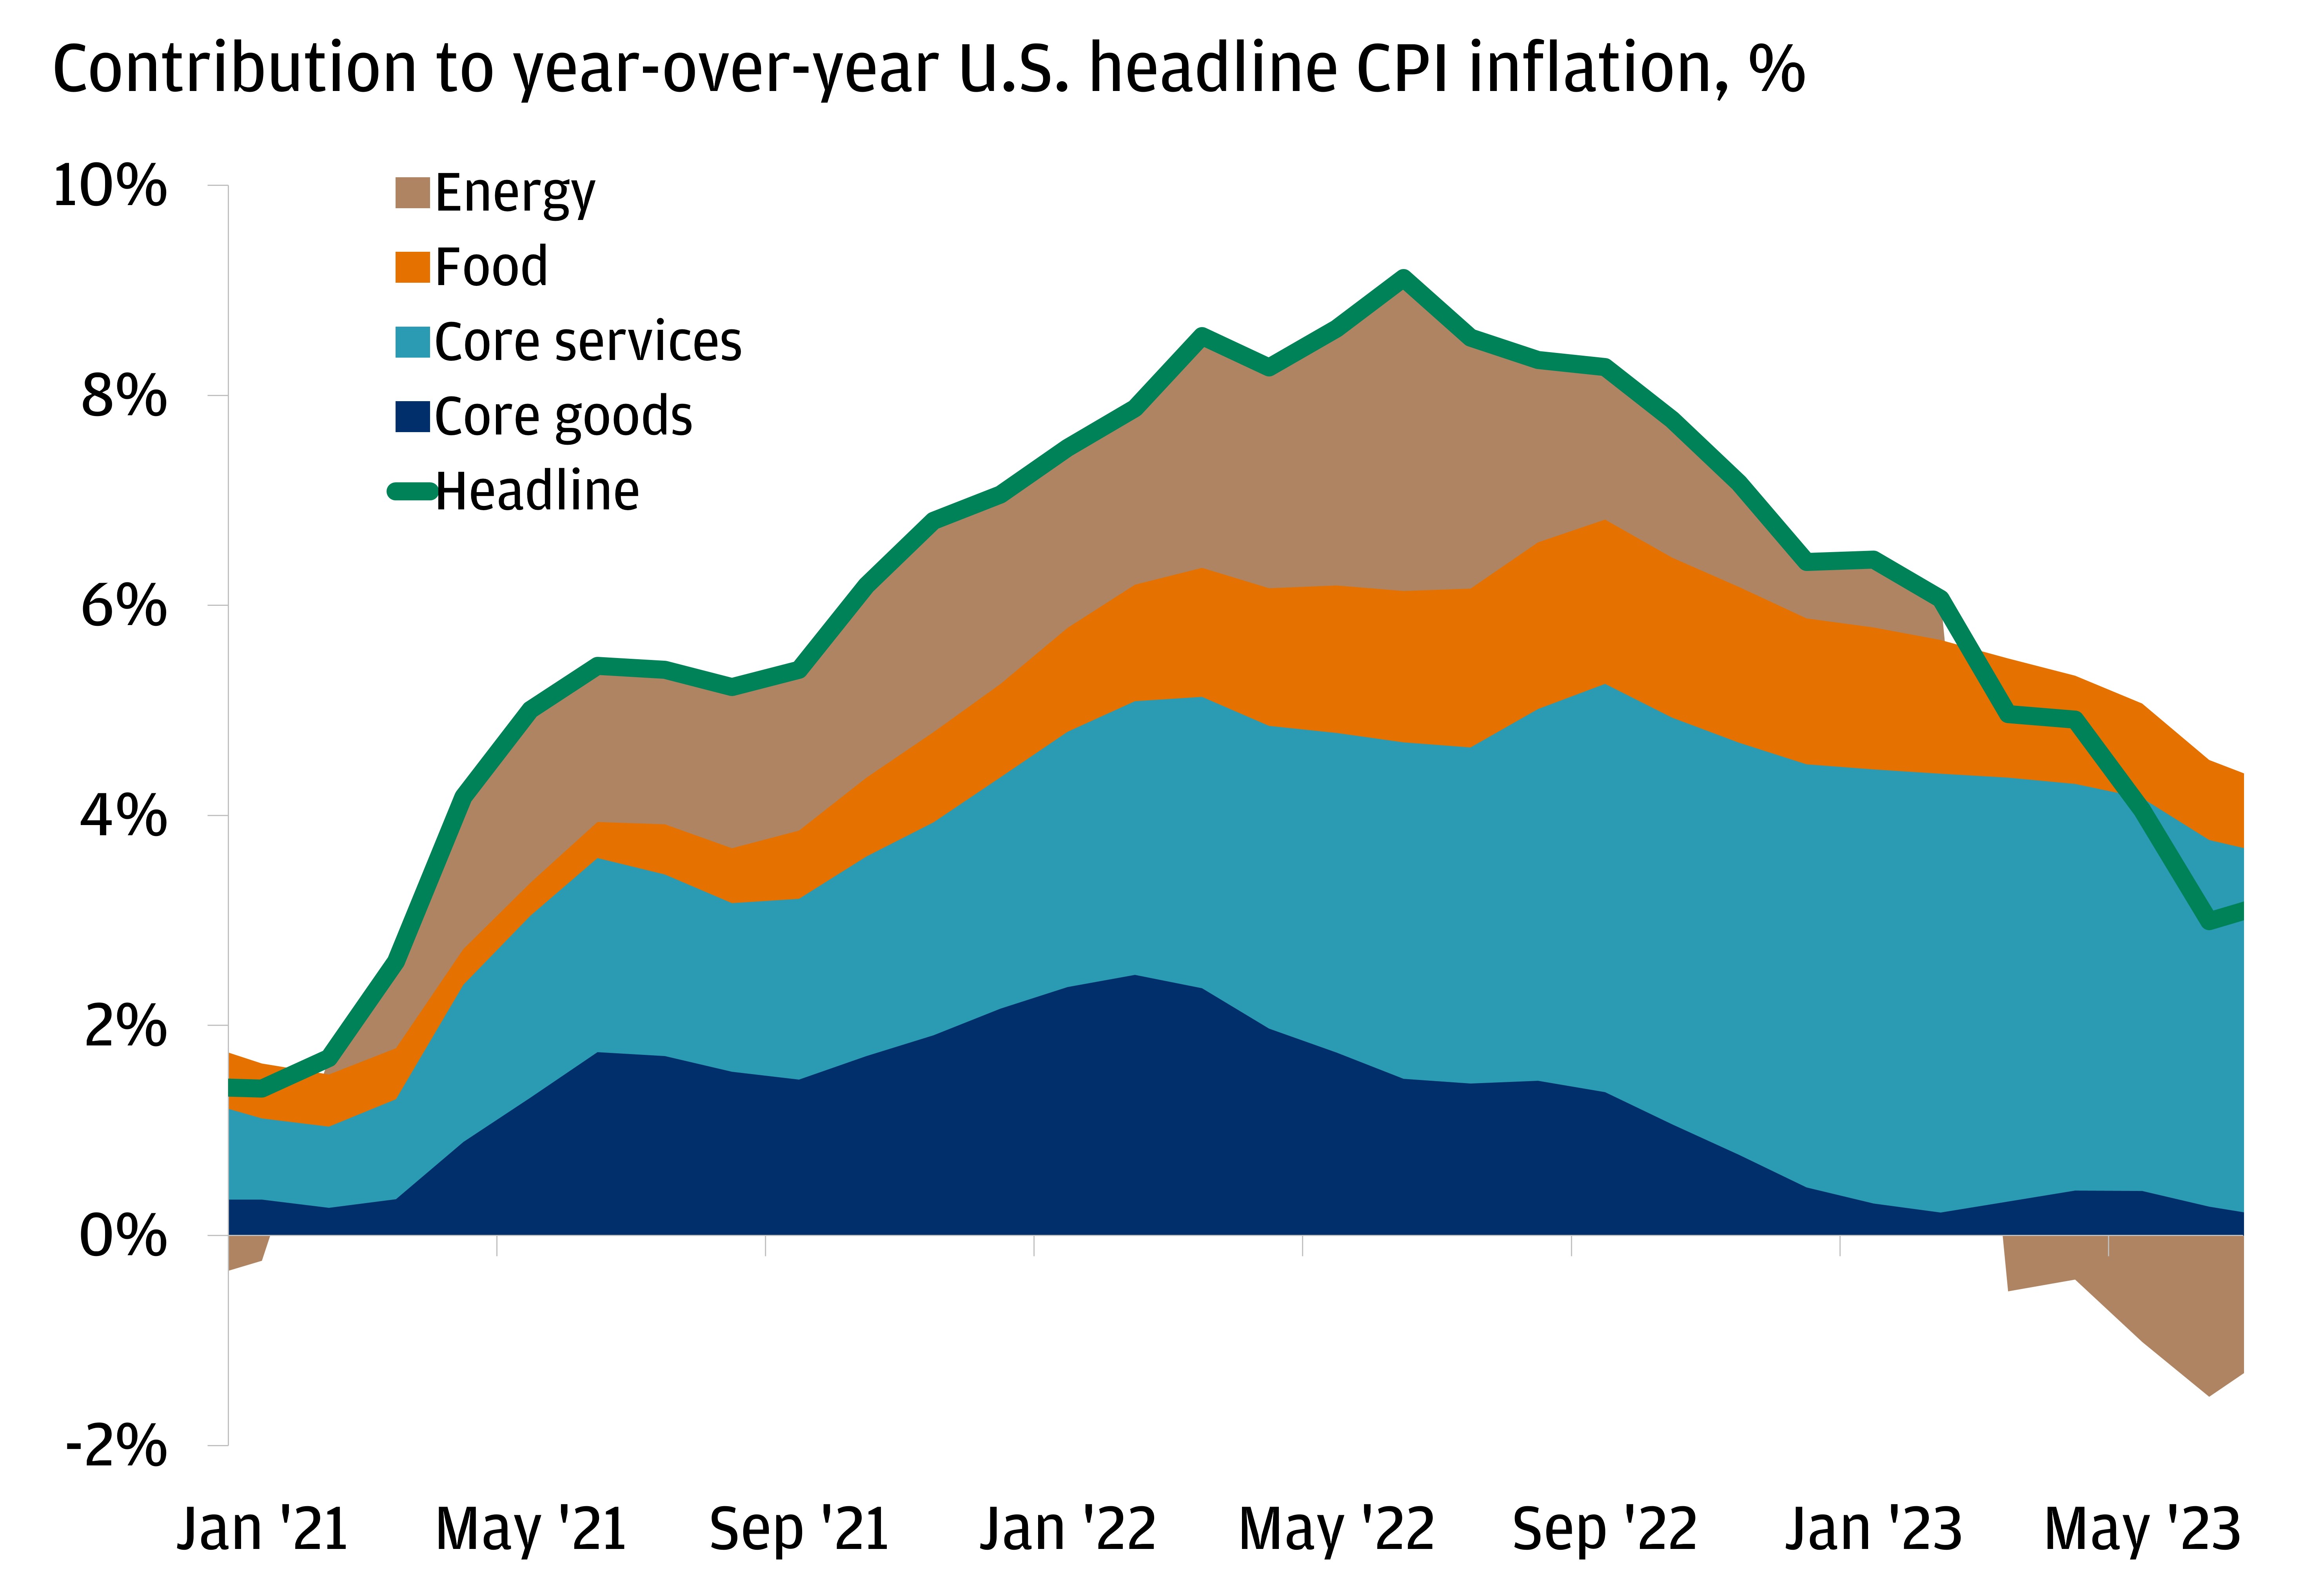 The chart describes the % year-over-year U.S. headline CPI inflation and the contributions of the four sub-segments (energy, food, core services, core goods) to the % YoY U.S. headline CPI inflation.